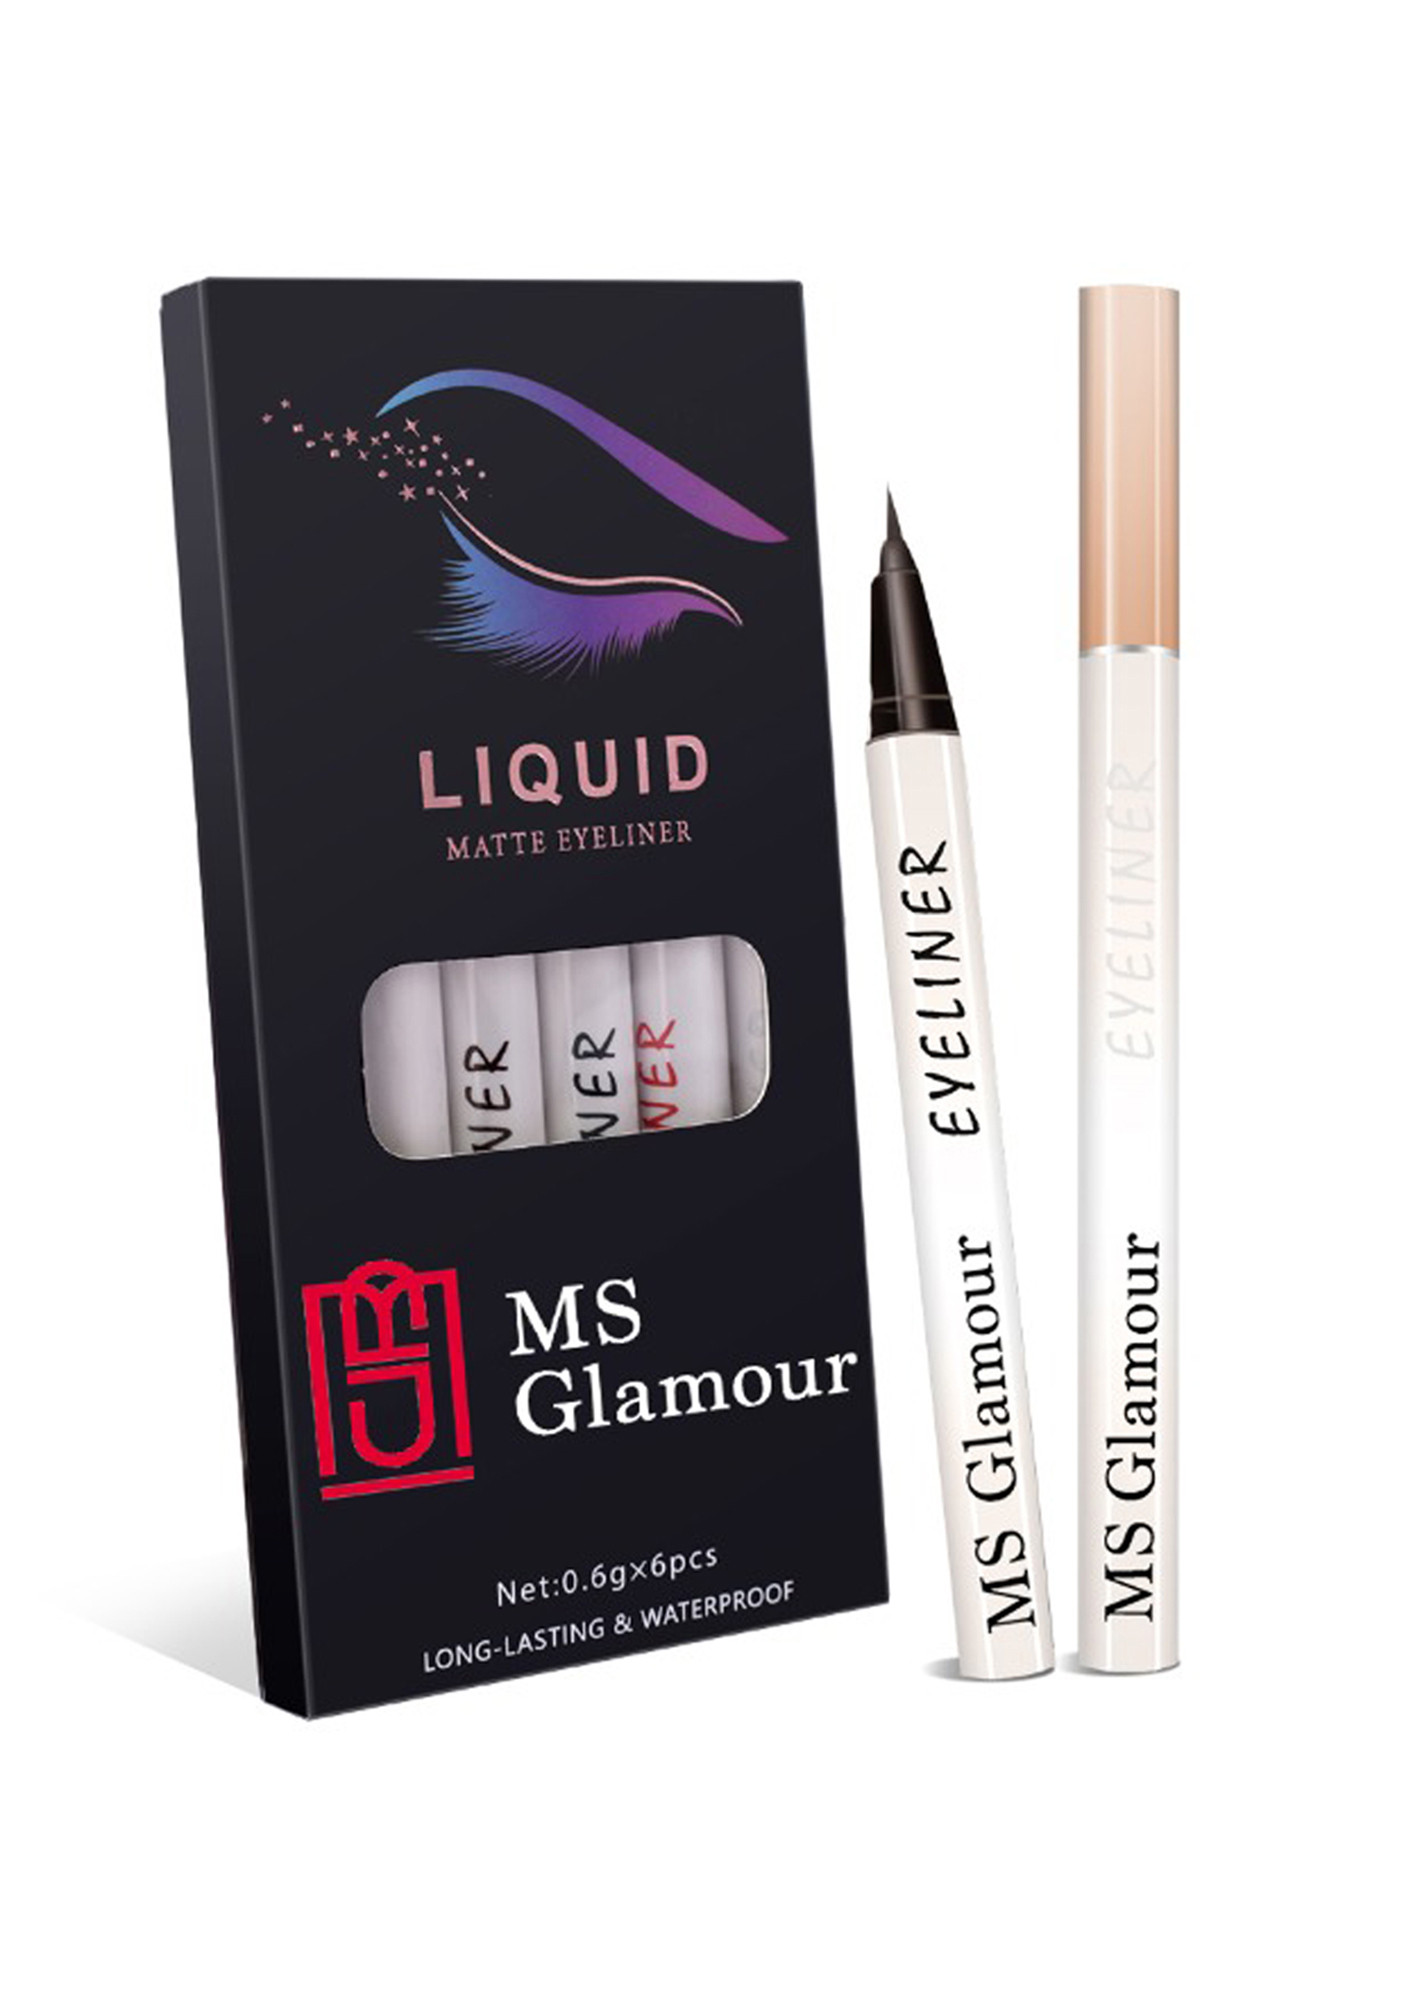 MS Glamour Long-Lasting & Waterproff Eyeliner Pencil Matte Finish 6 Colors | Last upto 12 Hours | Pack of 6